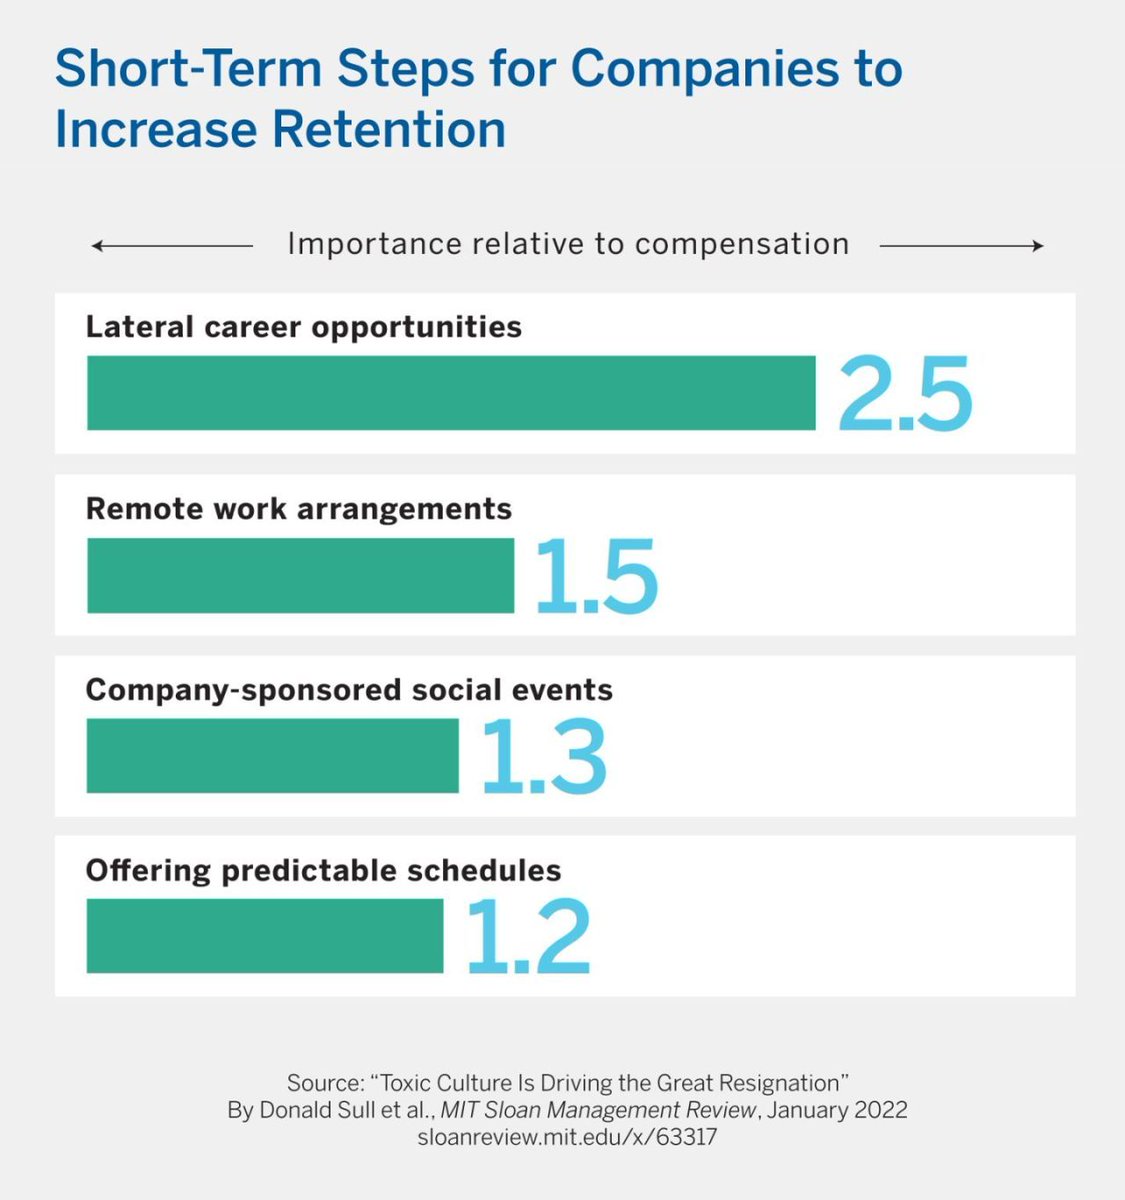 New research using employee data reveals the top five predictors of attrition and four actions managers can take in the short term to reduce attrition. Learn more: mitsmr.com/3K0roZN